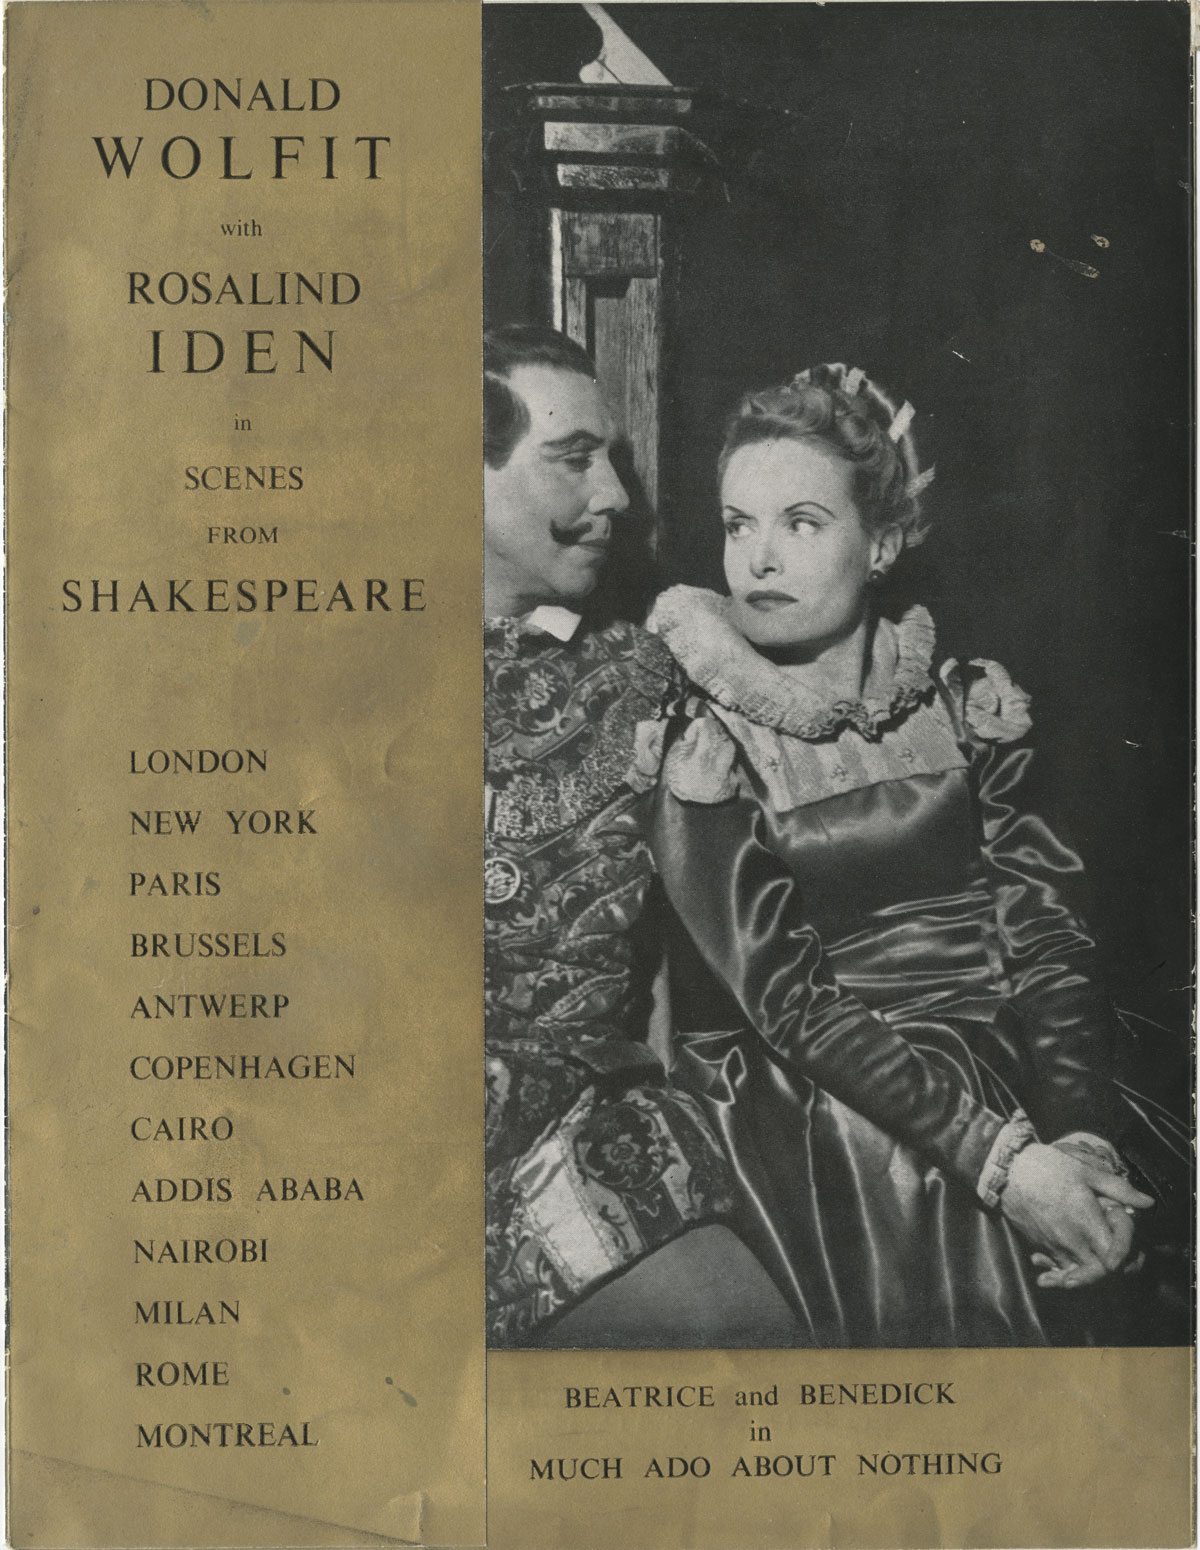 A program for “Scenes from Shakespeare,” ca. 1950s. Donald Wolfit Papers, Harry Ransom Center In his autobiography, Wolfit identified this image as a production of Much Ado about Nothing at the Royal Opera House, Cairo, in 1945. Much Ado was a staple of the Shakespeare recitals given by Wolfit and his wife and leading lady Rosalind Iden. In the recitals, the encounters between Benedick (played by Wolfit) and Beatrice (played by Iden) were presented in costume, but without blocking or sets. The gown on display does not have the neck ruff shown here, nor does it have beads and other embellishments that were added to the dress later.